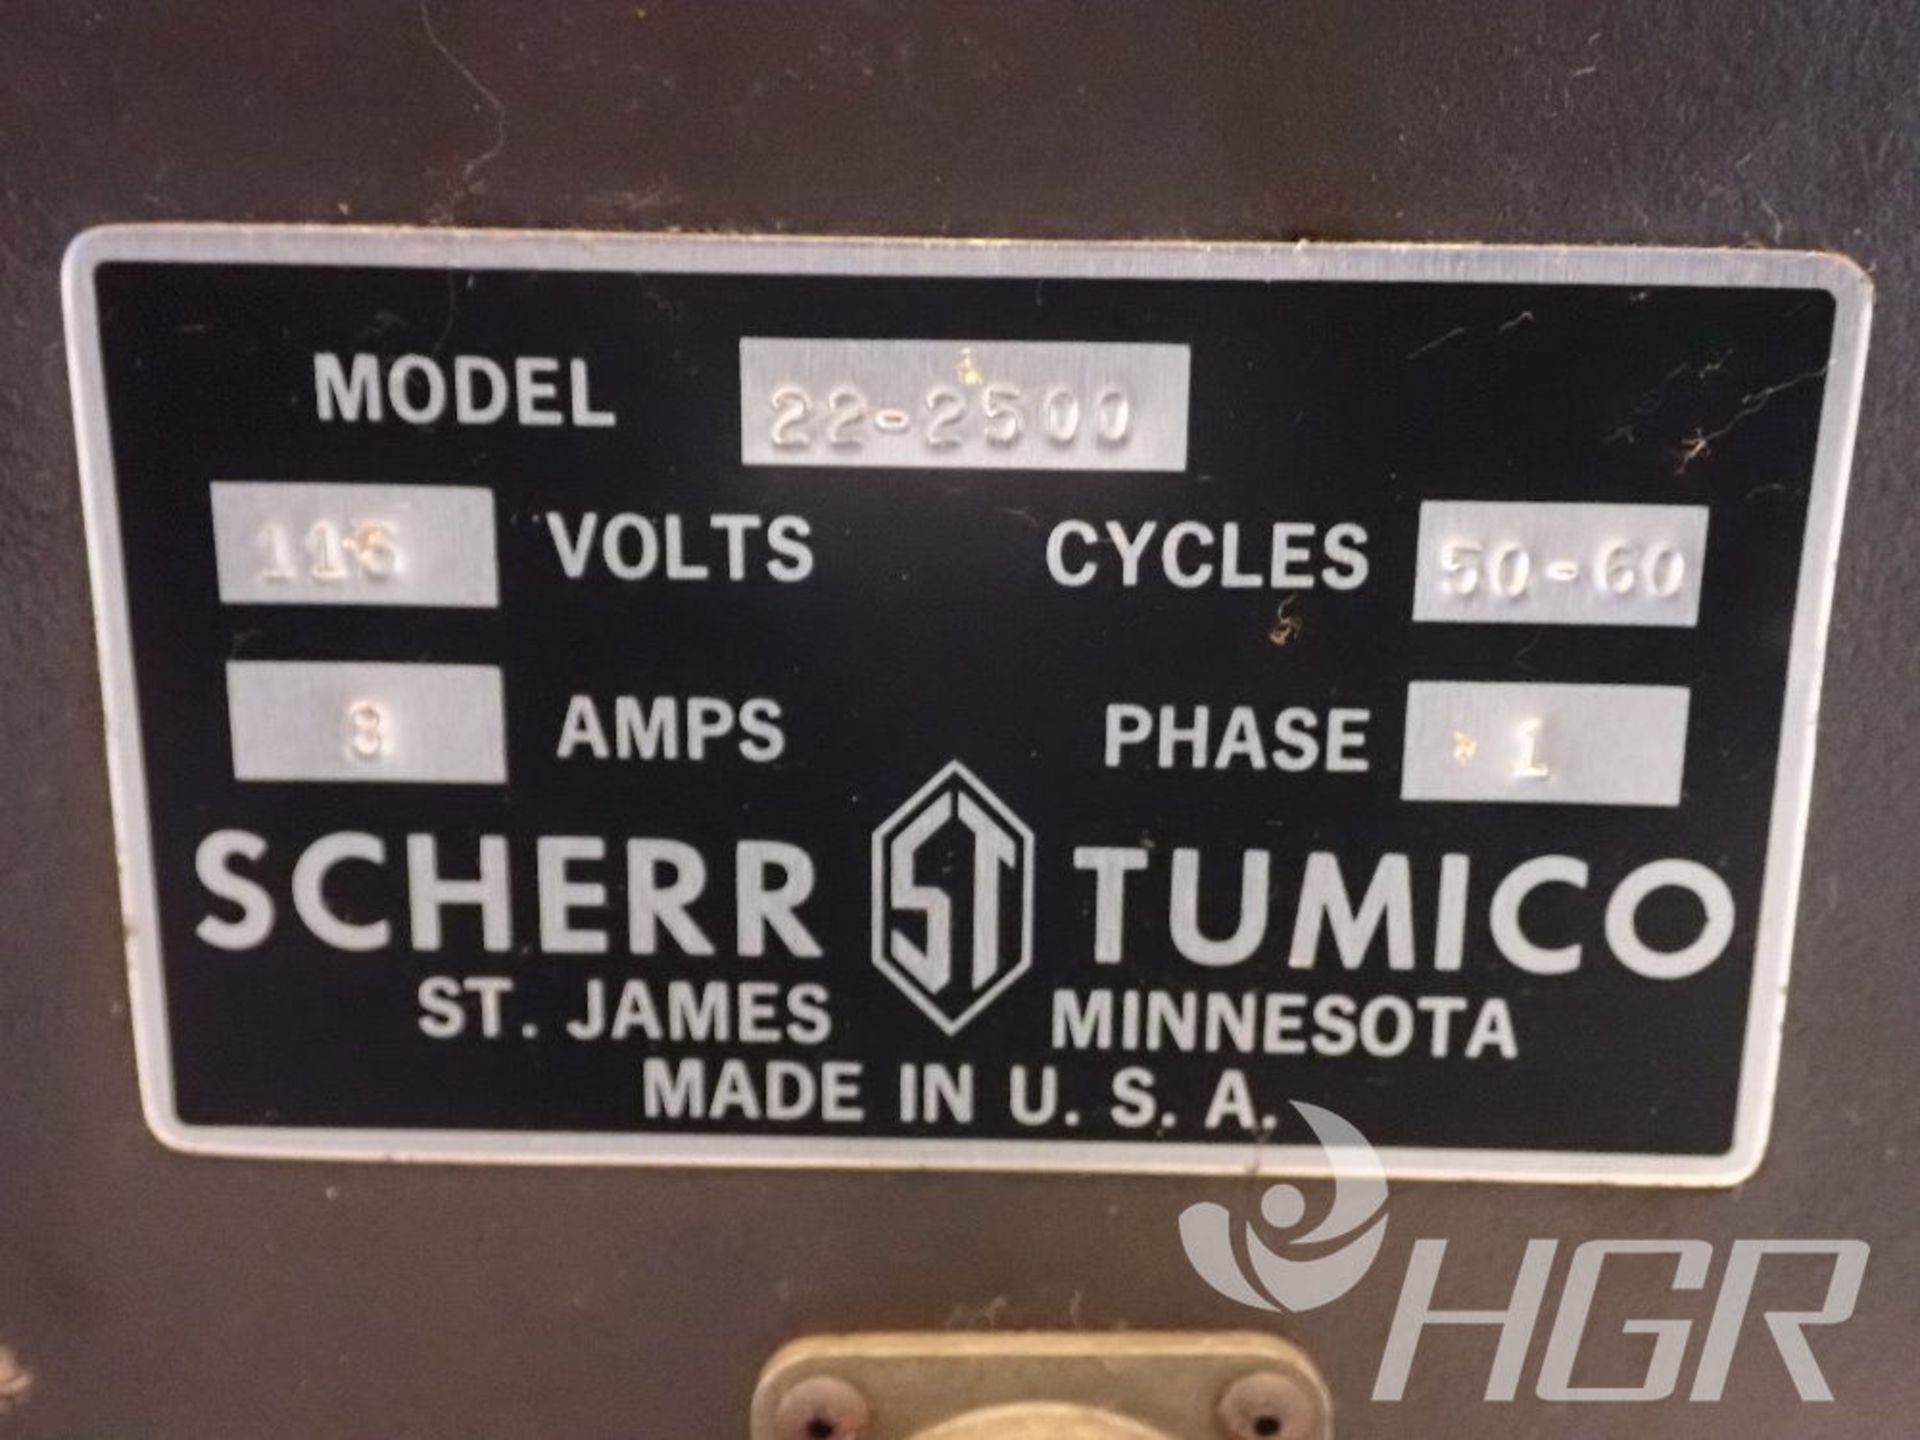 SCHERR TUMICO COMPARATOR, Model 22-2500, Date: n/a; s/n n/a, Approx. Capacity: 30", Power: 1/60/115, - Image 3 of 15